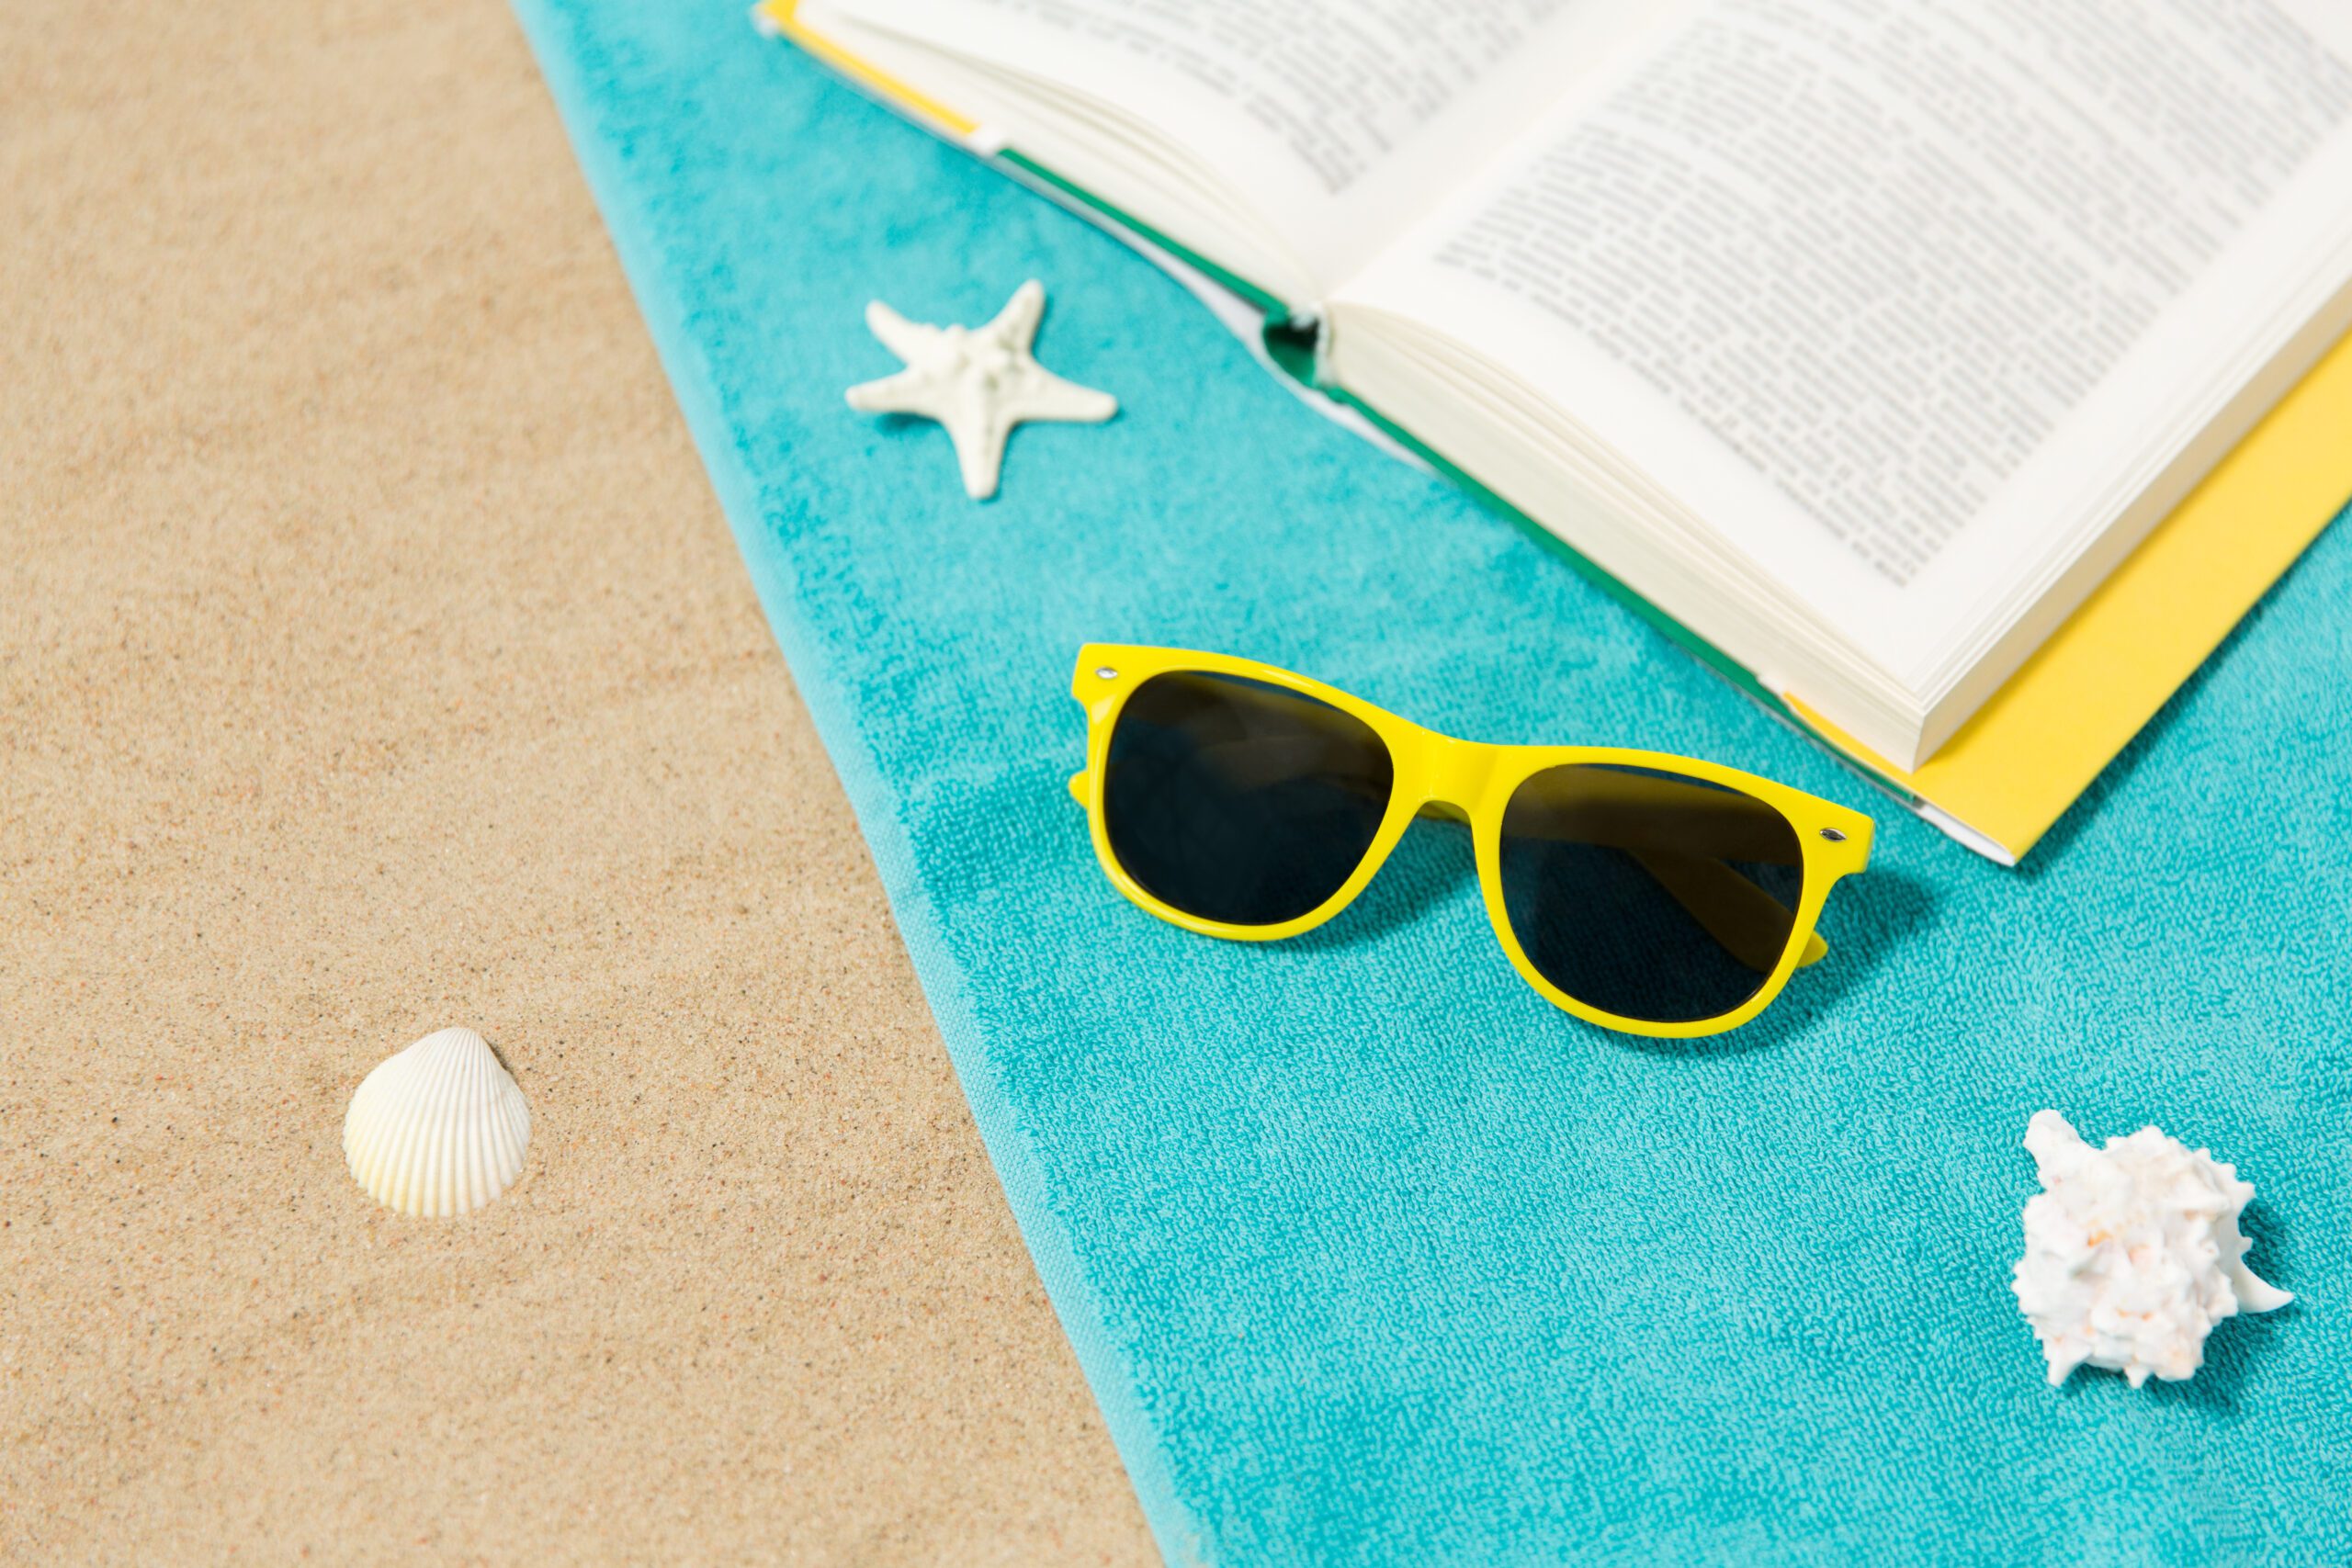 sunglasses and book on beach towel on sand